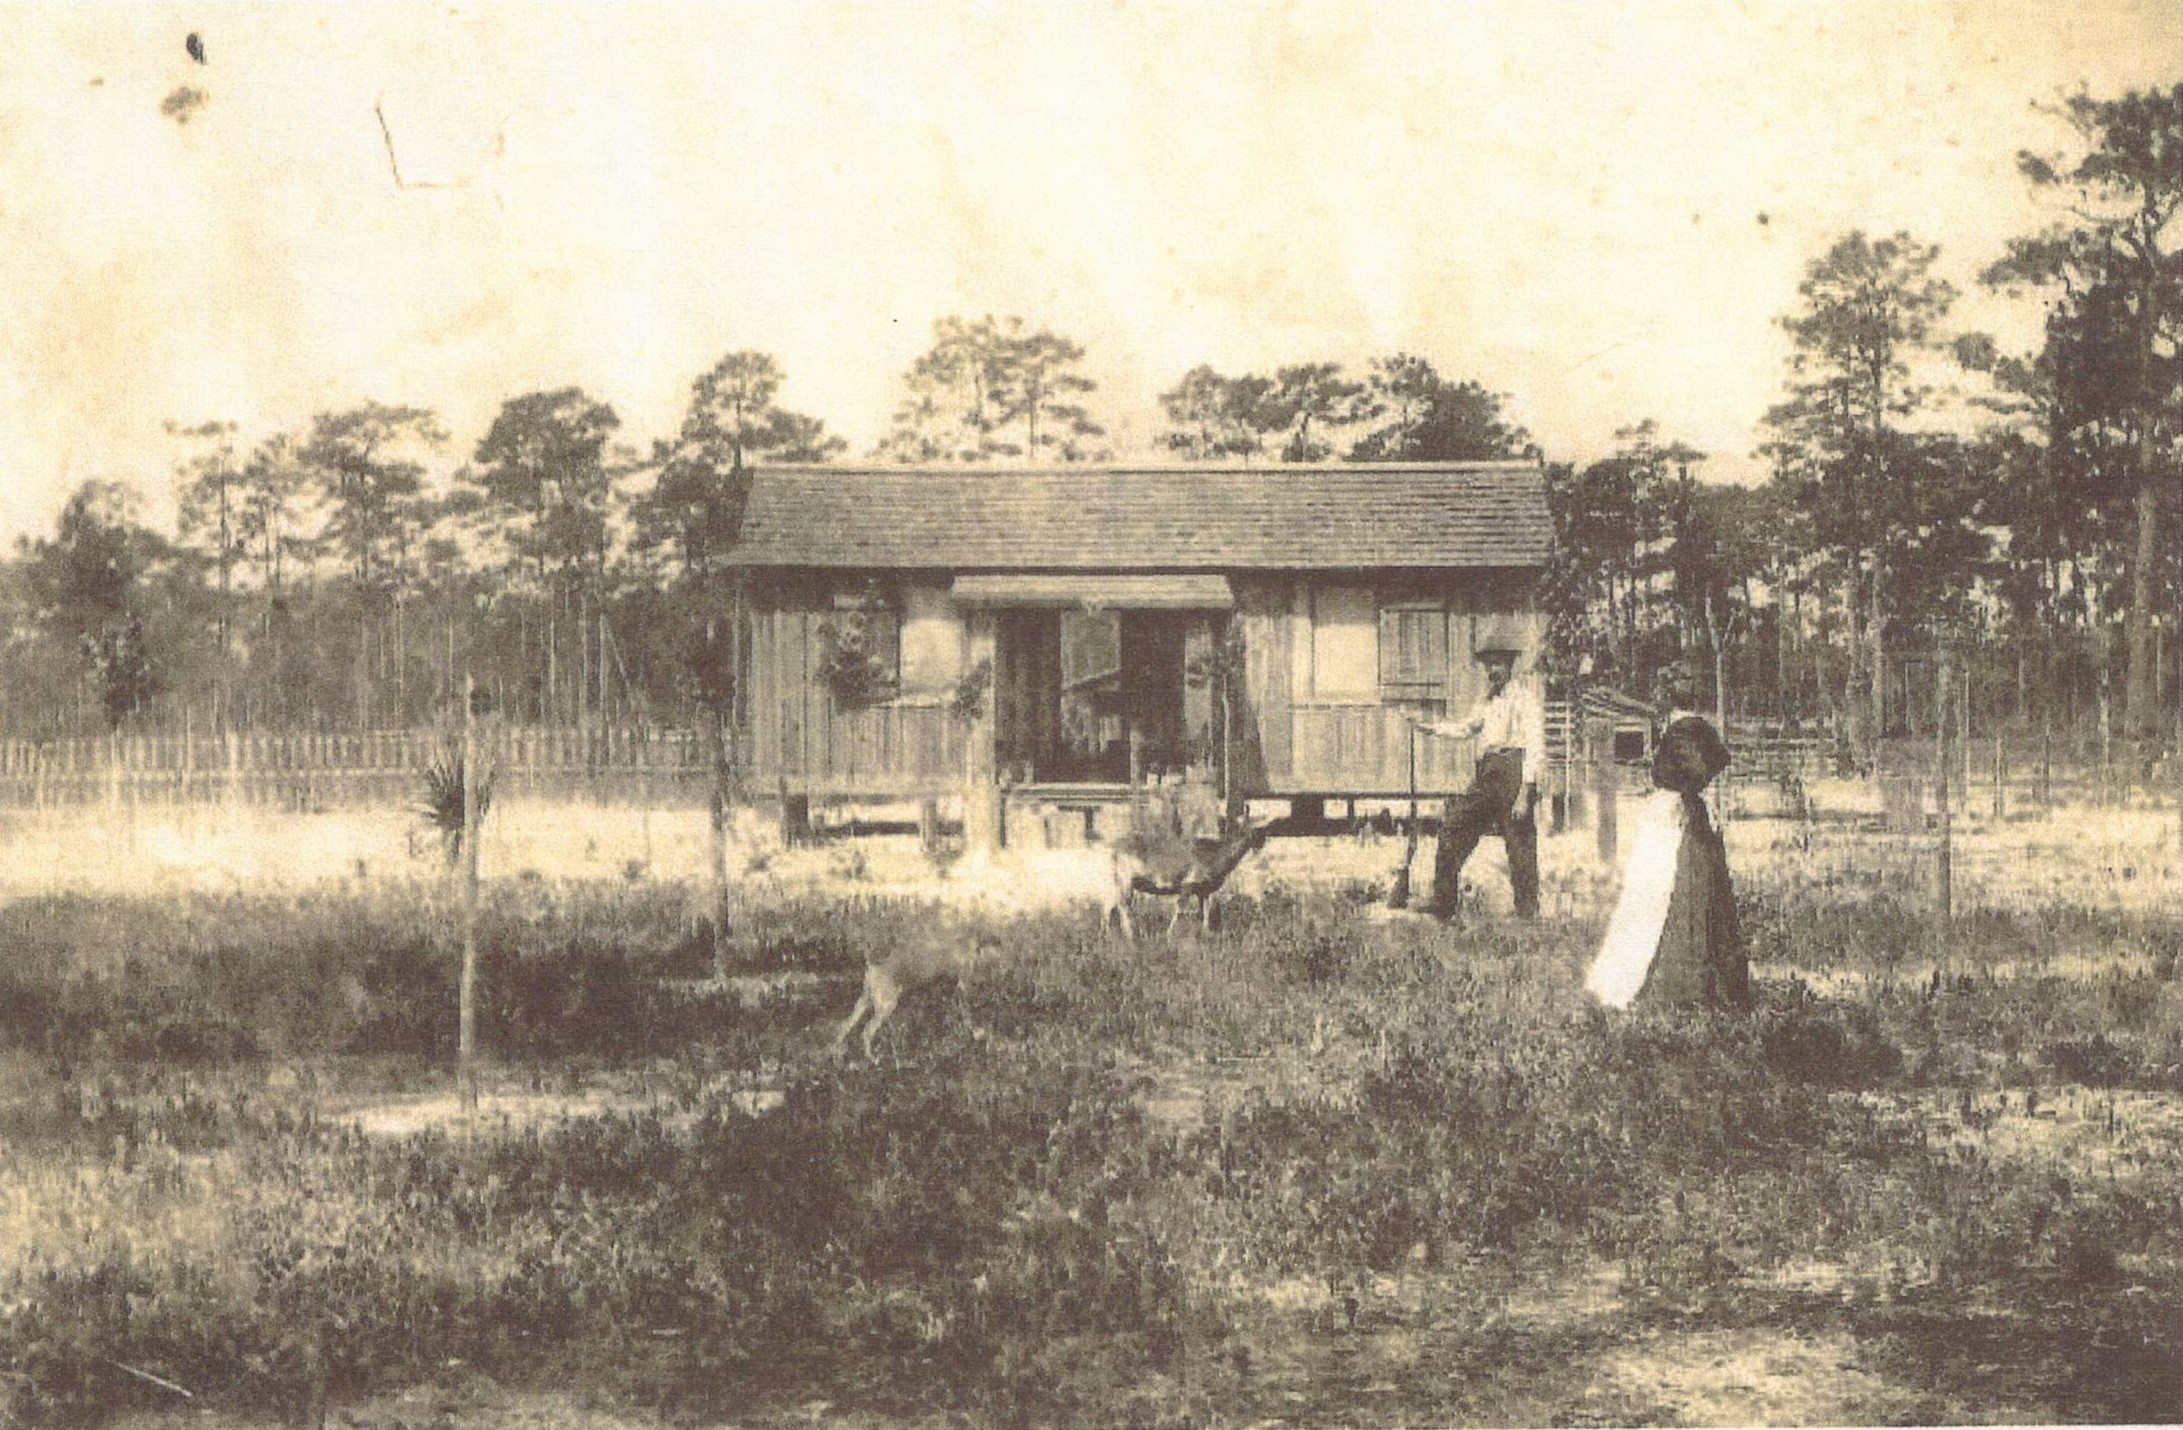 Ethel Resident Finley B. Click and wife Maggie in front of their 2nd home at Ethel 1912